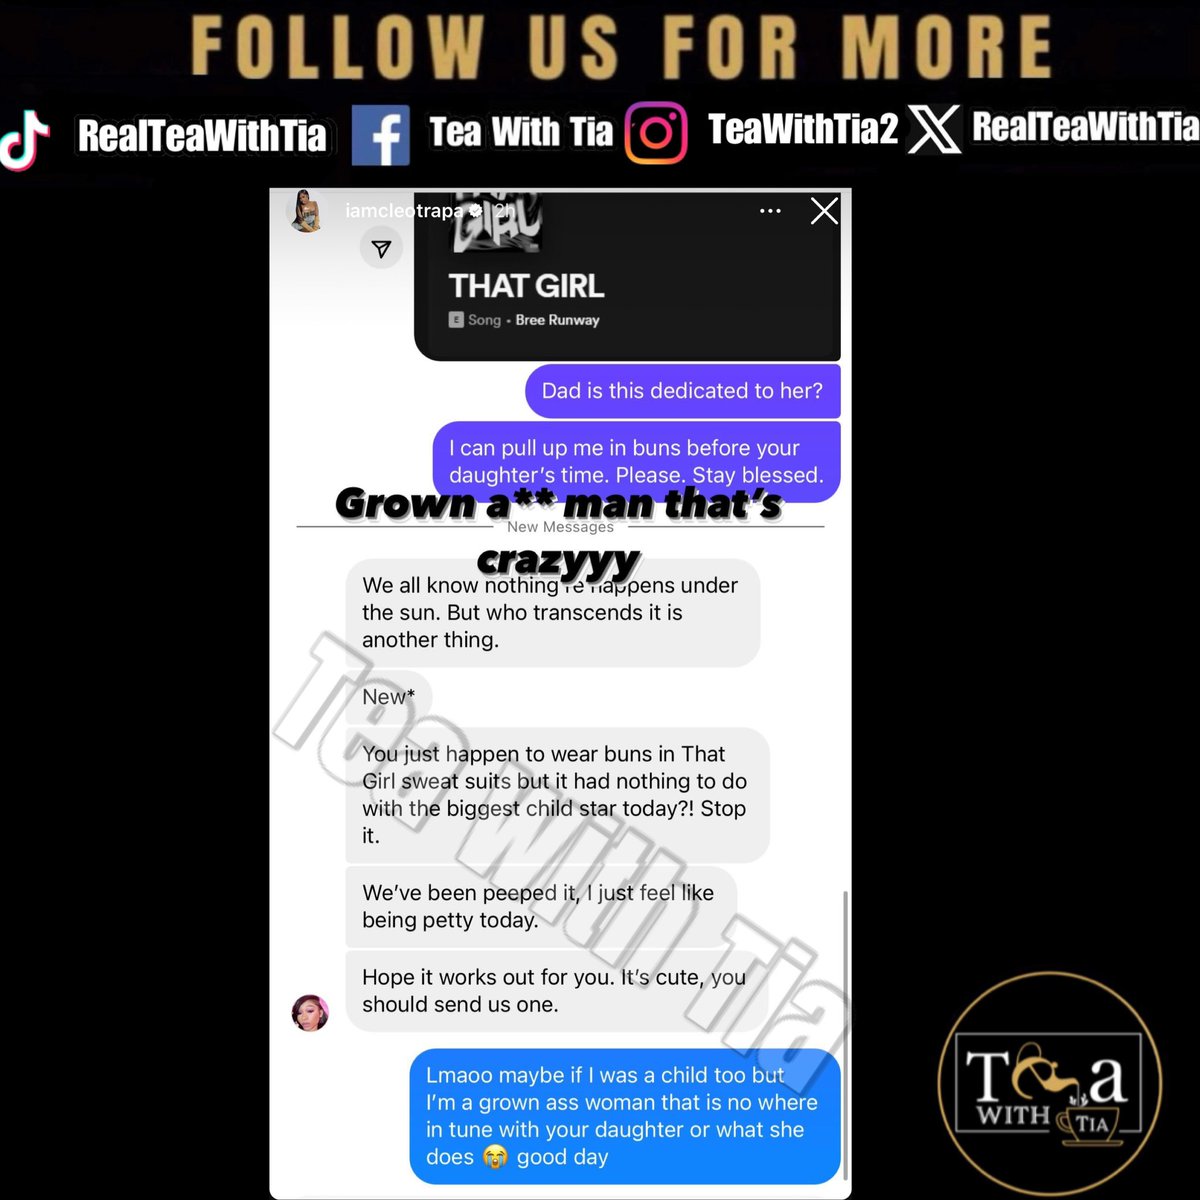 #Cleotrappa was confronted by #ThatGirlLayLay’s dad accusing her of “copying” his daughter’s aesthetic with the buns and “That Girl” merch. Cleotrappa says don’t get it twisted, she been doing this before Lay Lay even came outside. 

Is he reaching ?